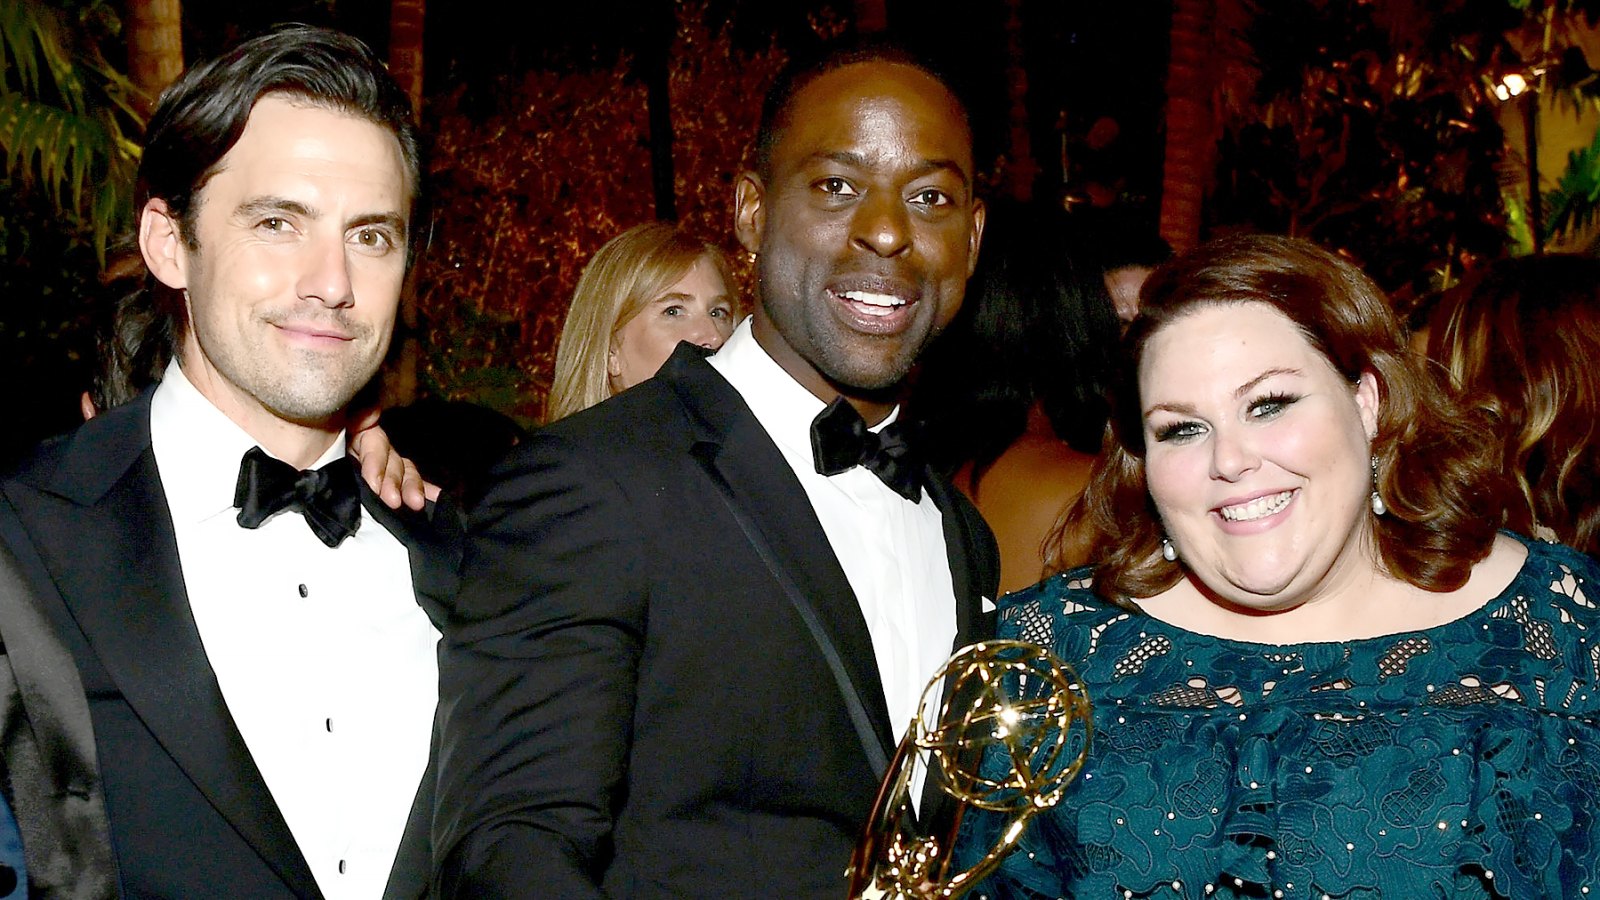 Milo Ventimiglia, Sterling K. Brown, Chrissy Metz attend FOX Broadcasting Company, Twentieth Century Fox Television, FX And National Geographic 69th Primetime Emmy Awards After Party at Vibiana on September 17, 2017 in Los Angeles, California.